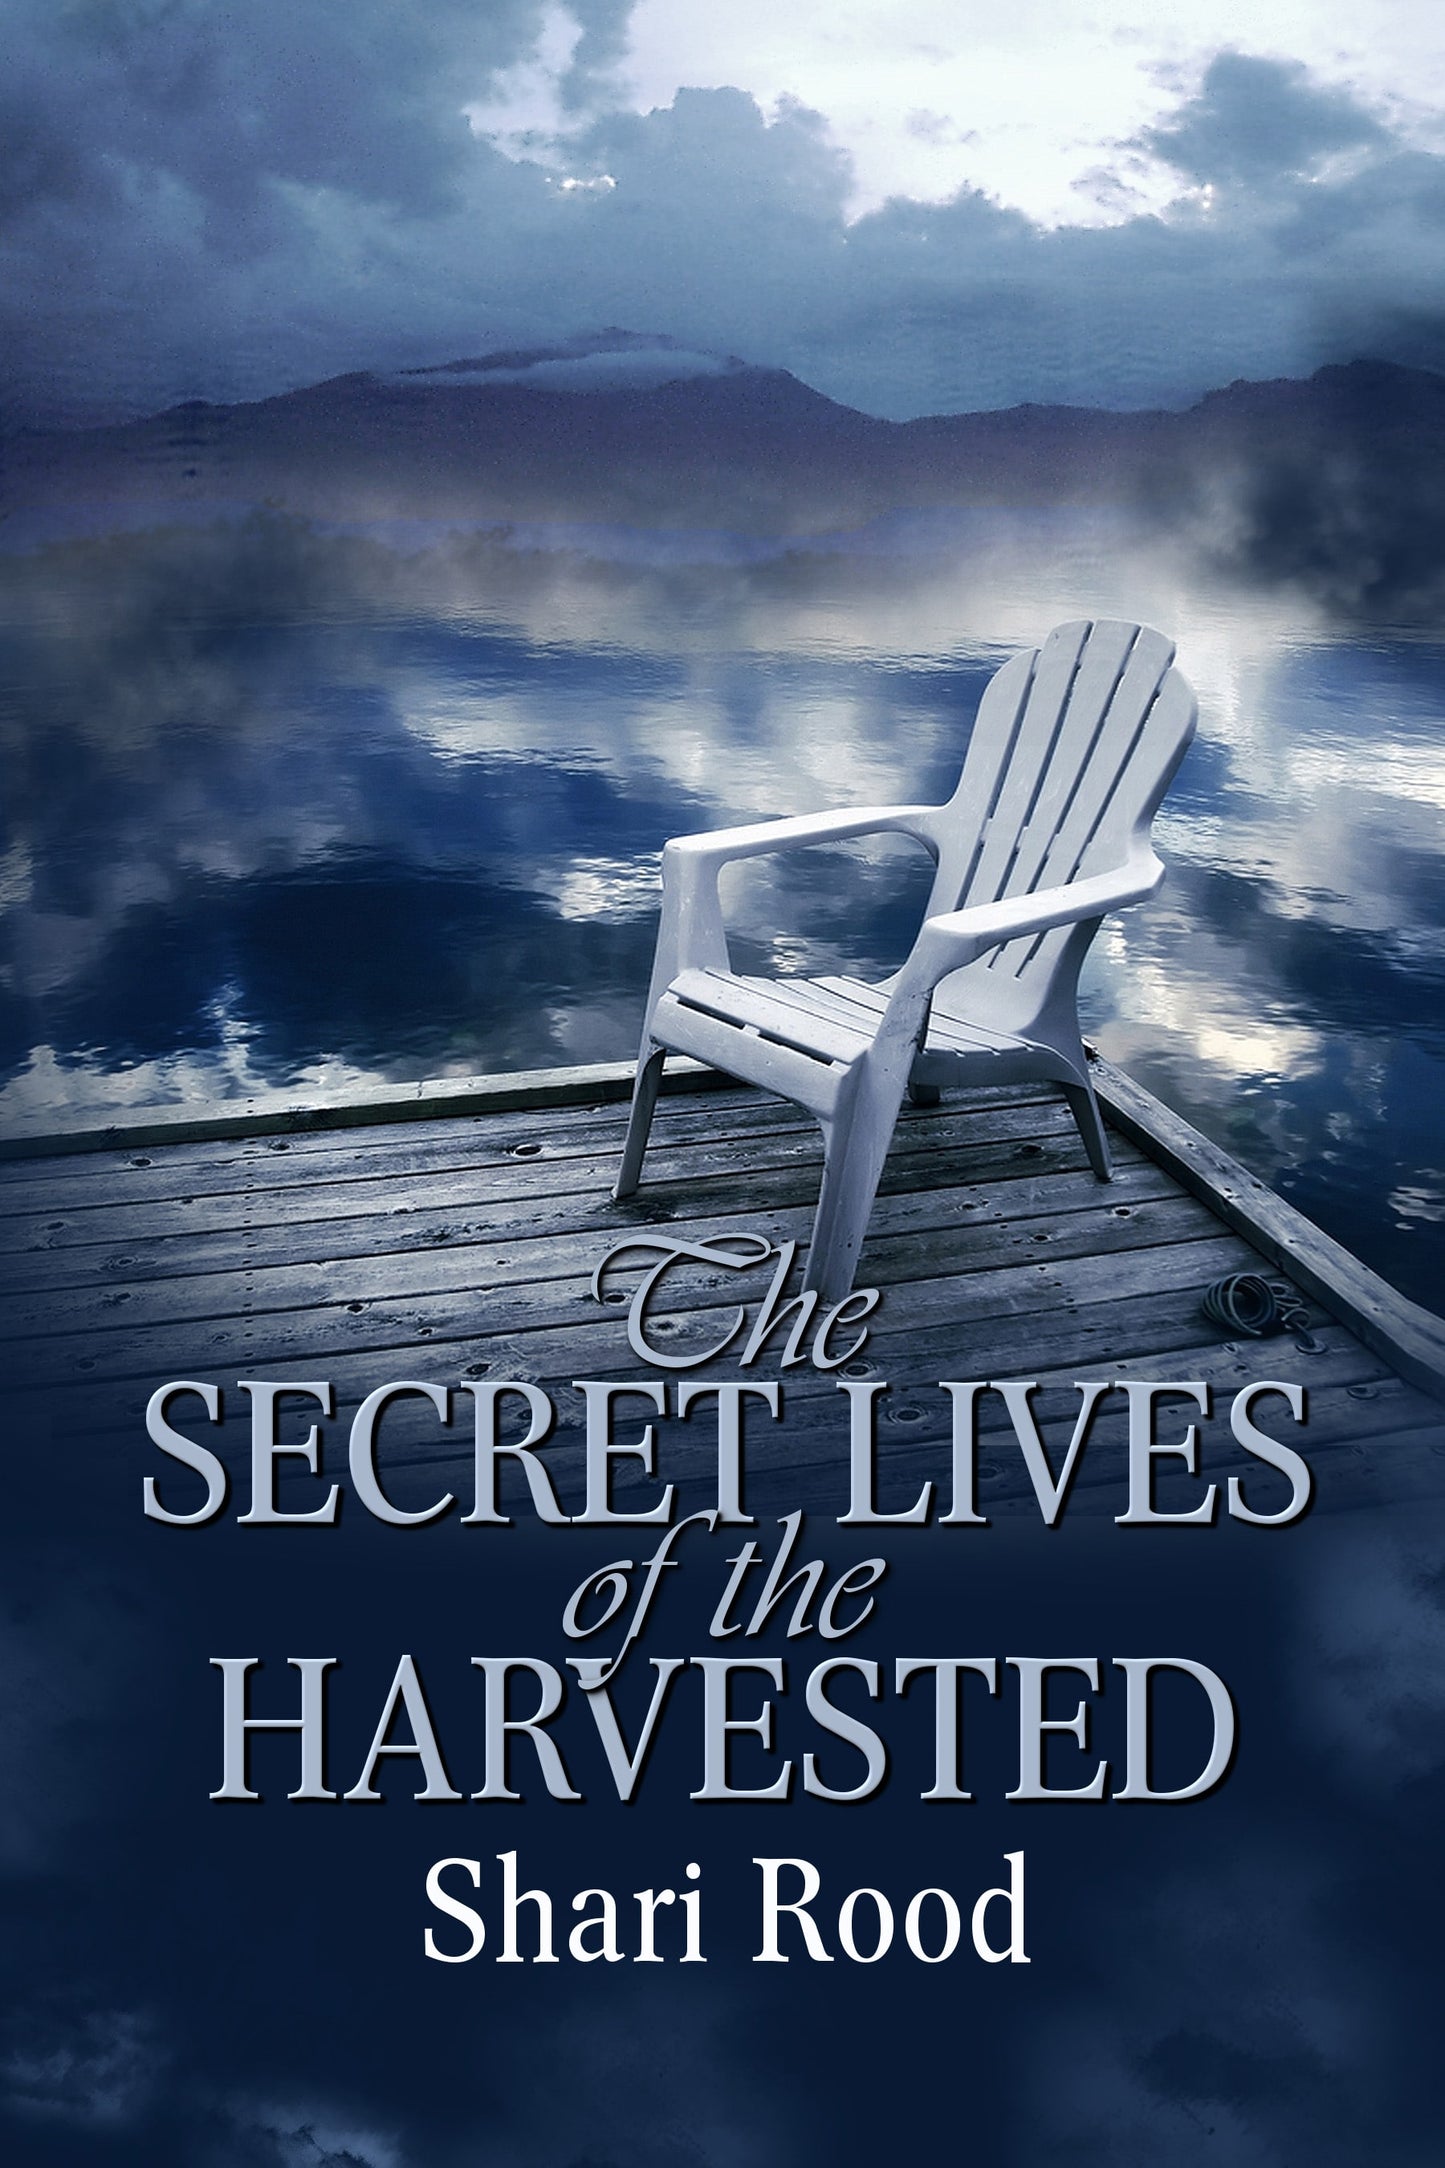 The Secret Lives of the Harvested